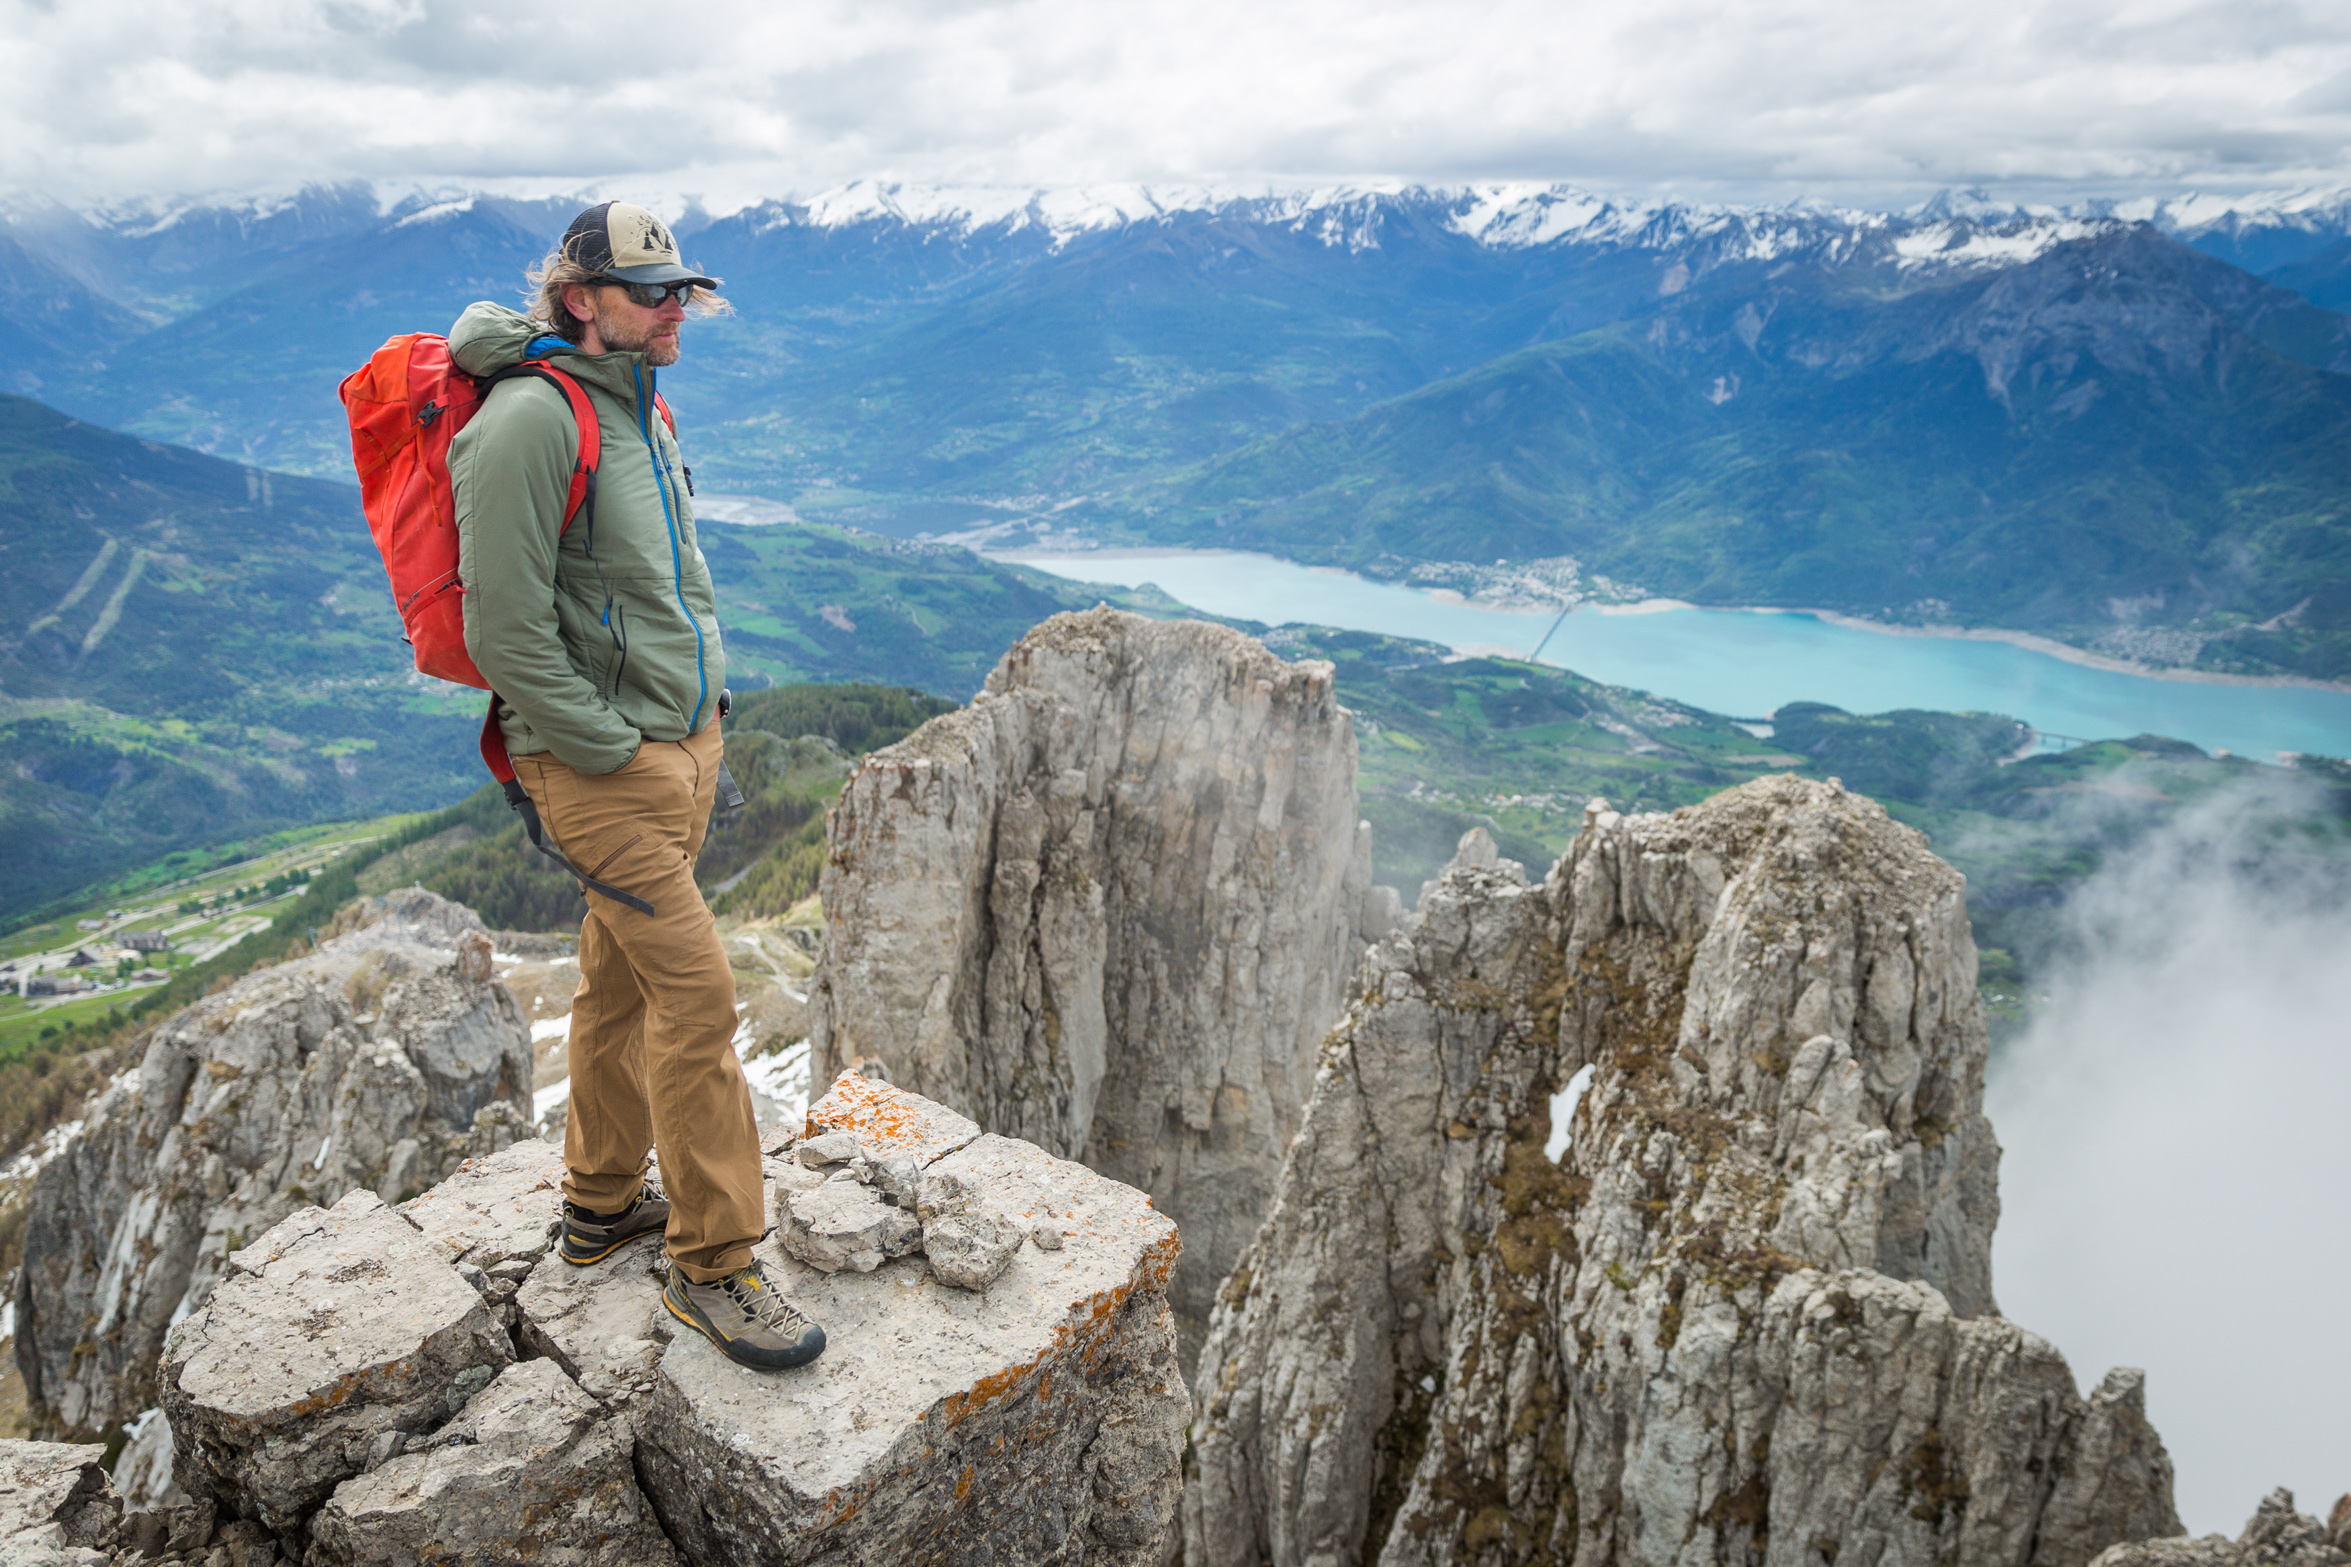 Dressed in brown pants and a sage green jacket with blue zipper, a man wearing a cap, sunnies and a red backpack stands atop a mountain on a small rock platform looking over the view, the green valley far below with a long blue lake down the middle